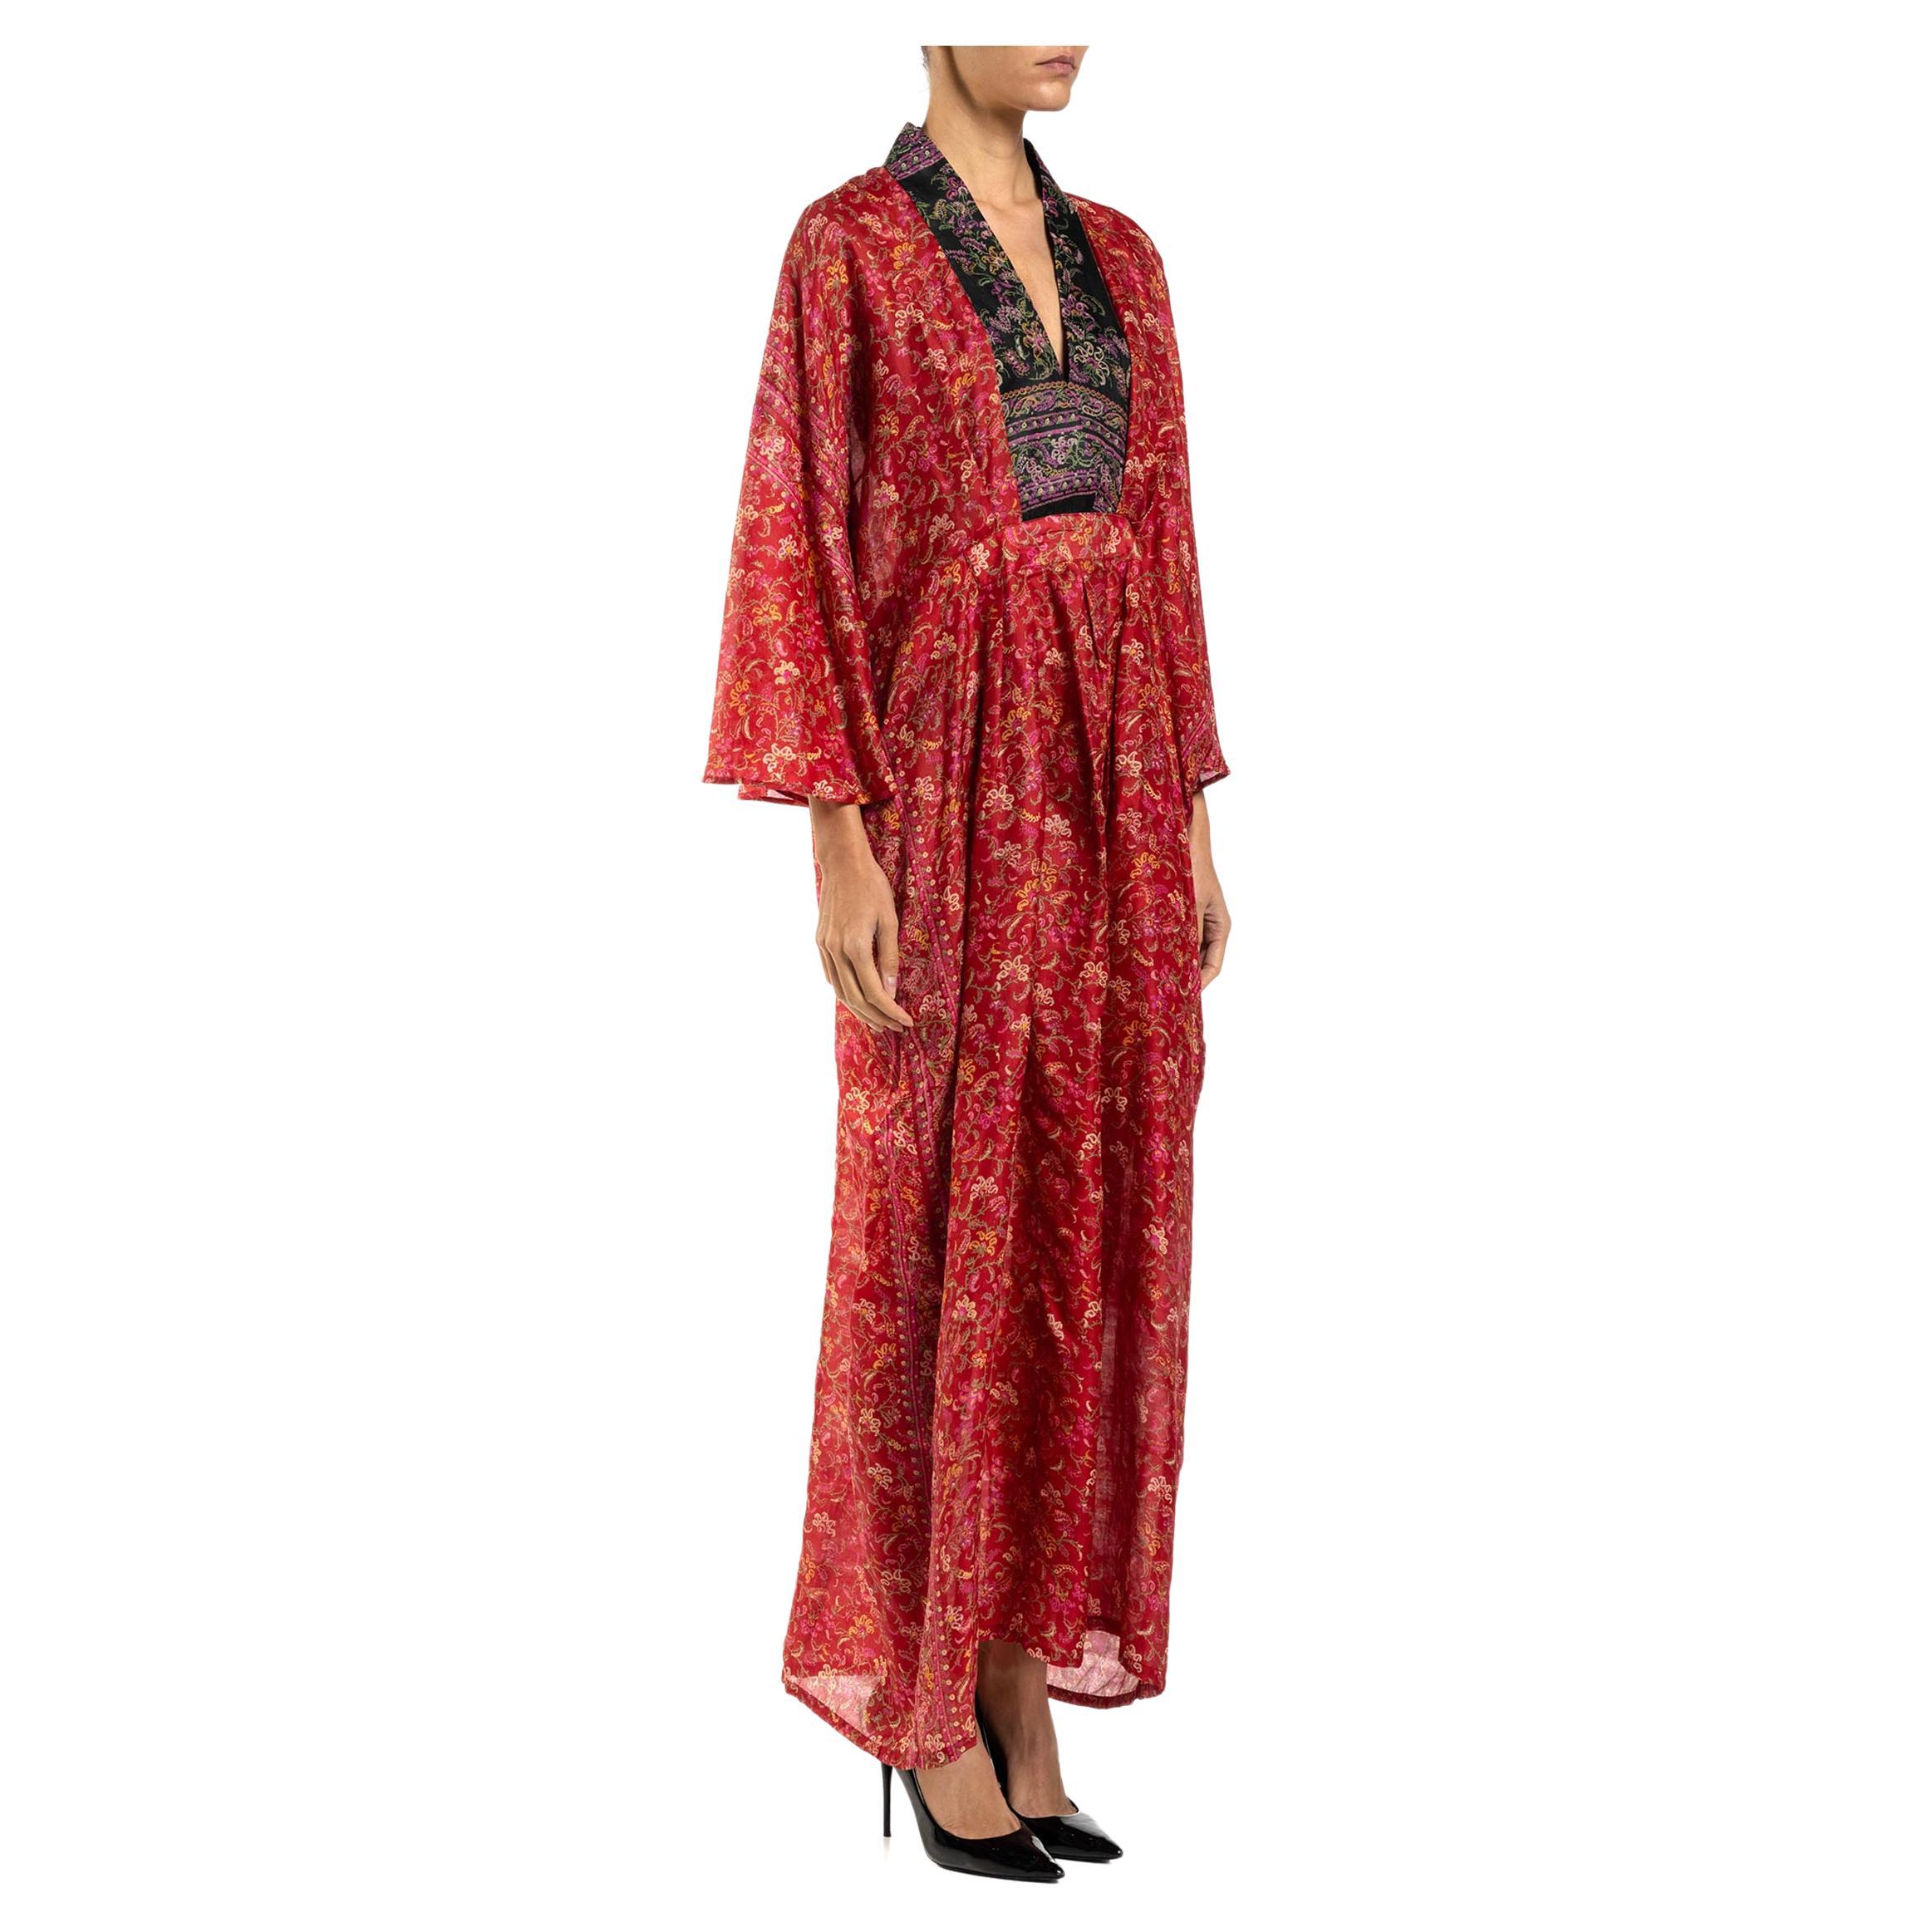 MORPHEW COLLECTION Red & Black Paisley Silk Floral Kaftan Made From Vintage Sari For Sale